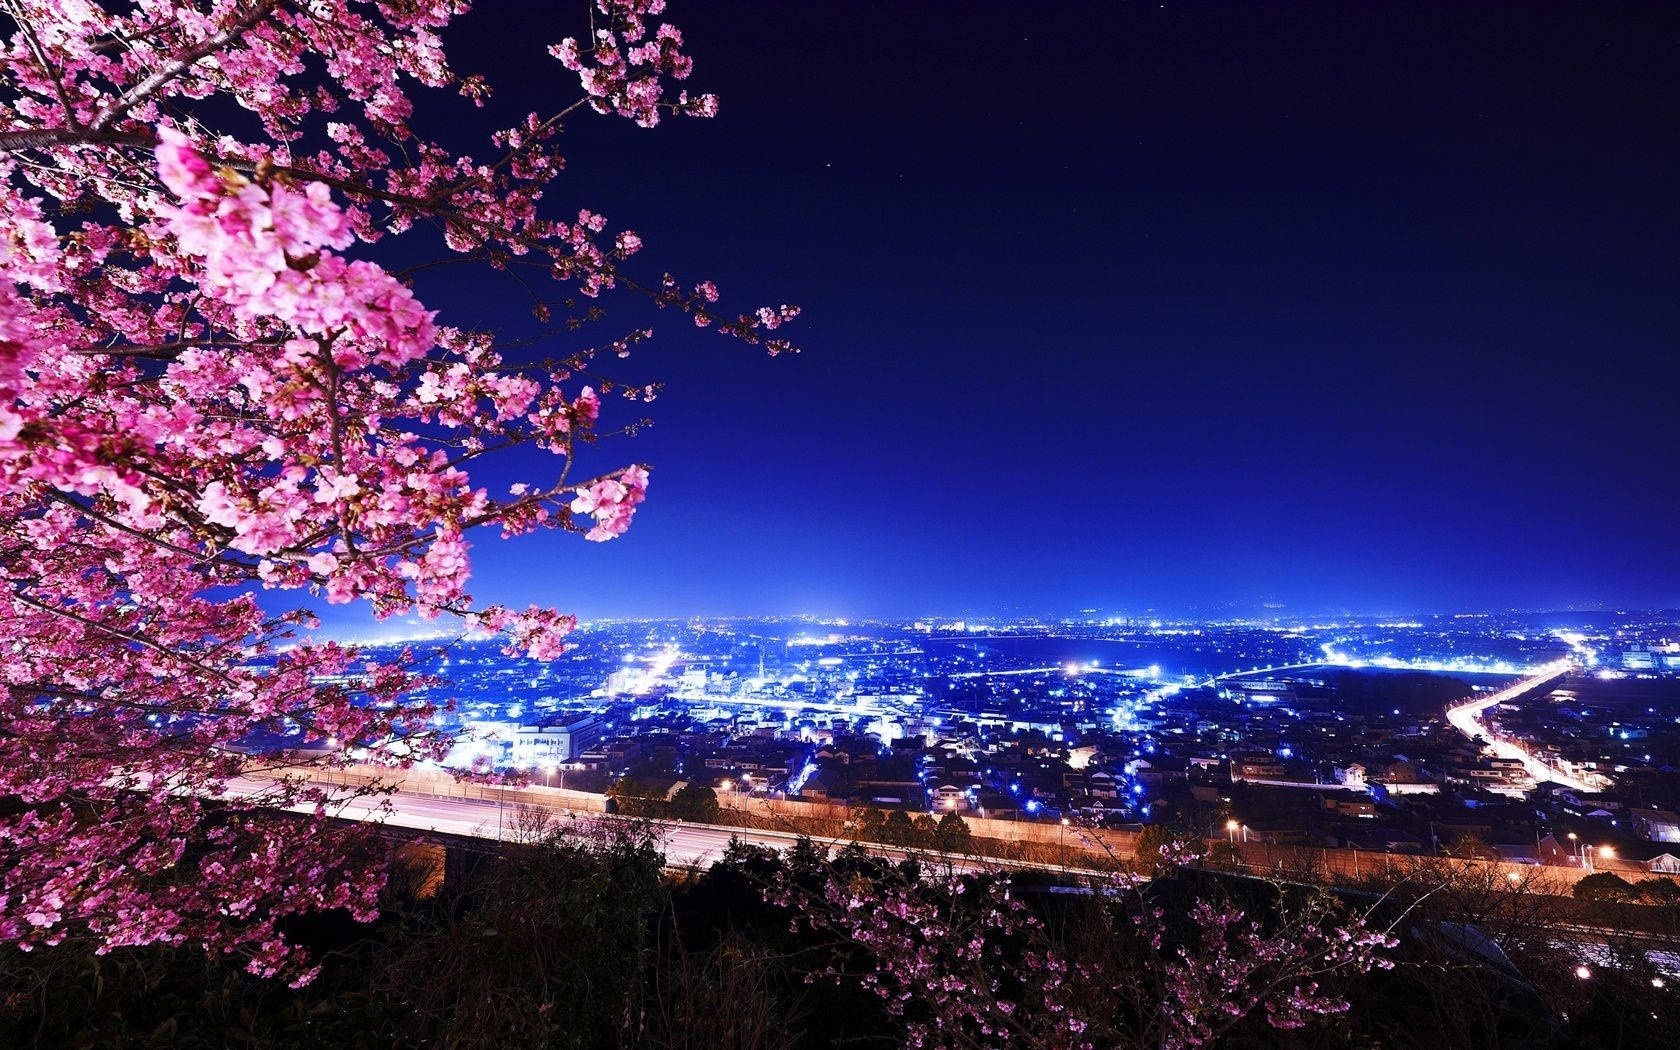 Looking up at a night sky lit up by cherry blossoms. Wallpaper